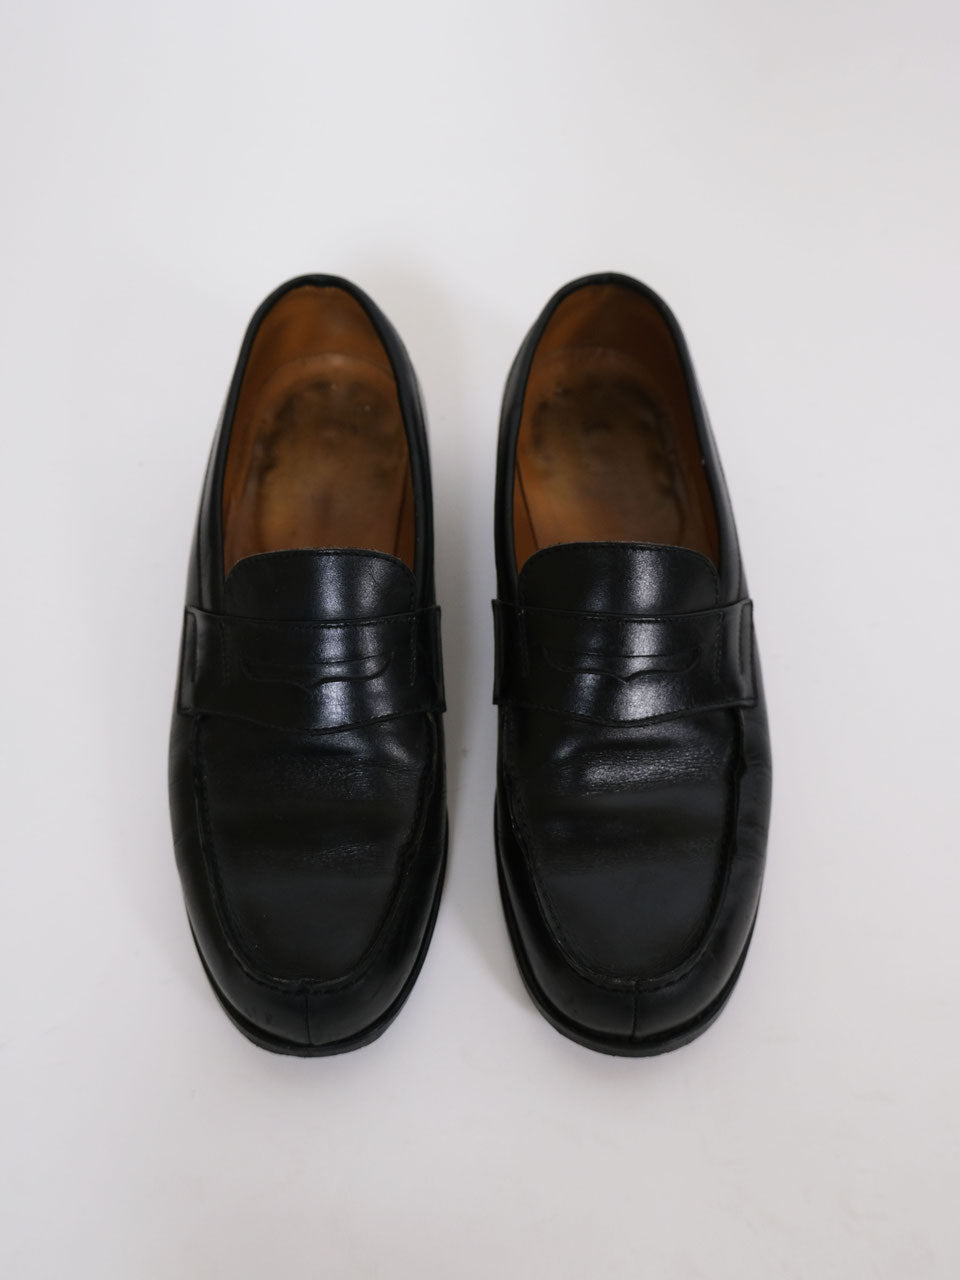 Leather loafers shoes black